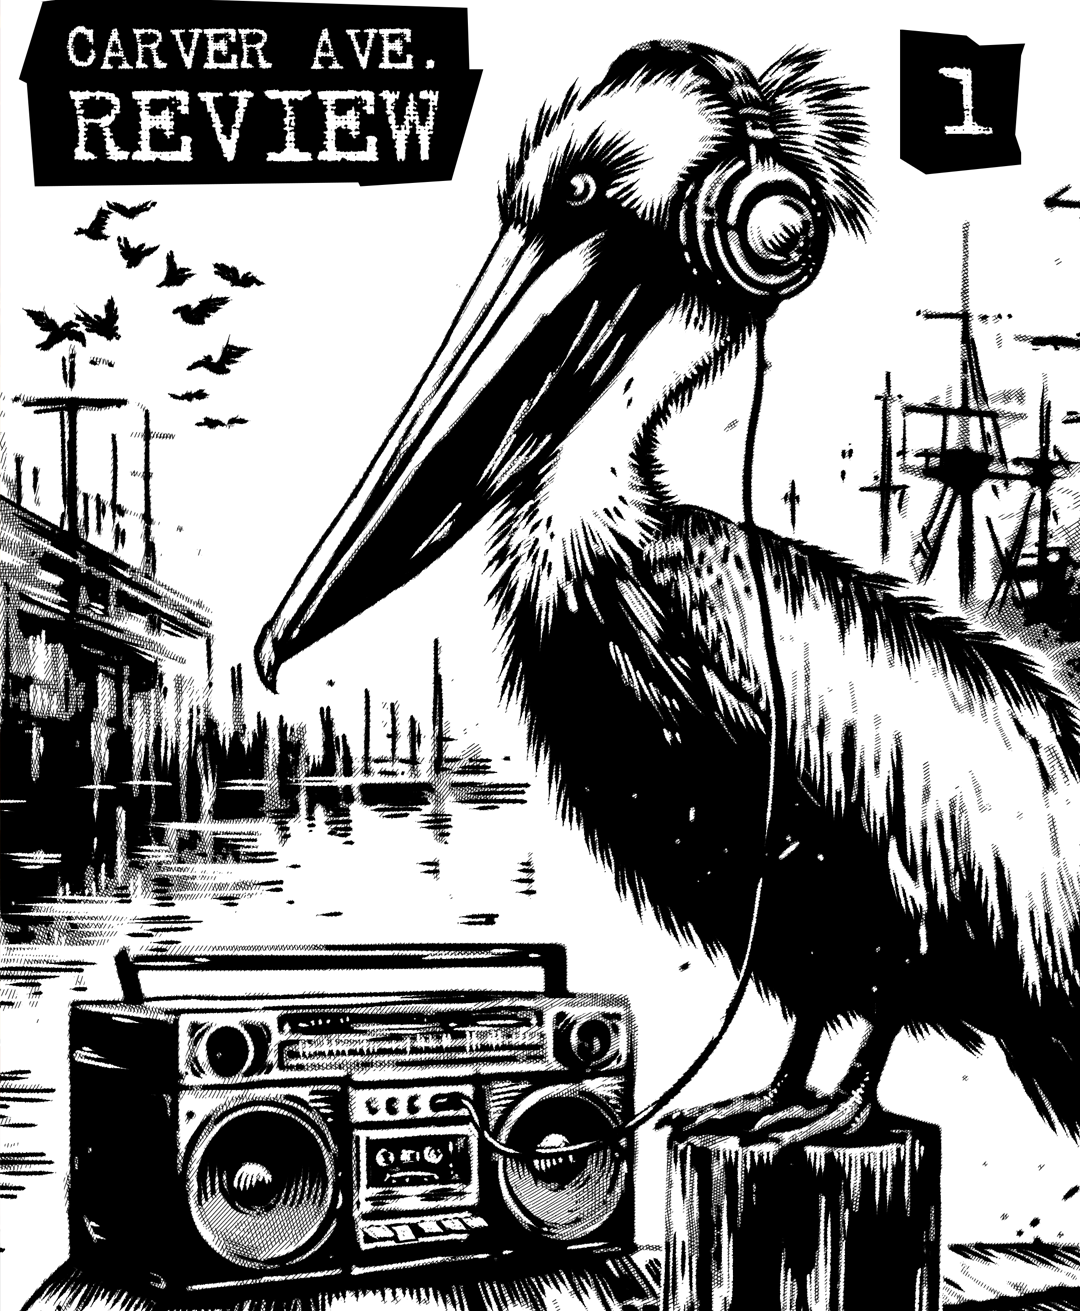 A thumbnail image of the cover of the Carver Ave. Review #1, with a black-and-white illustration showing a pelican wearing headphones plugged into a boombox on a pier at the waterfront in Haquel.